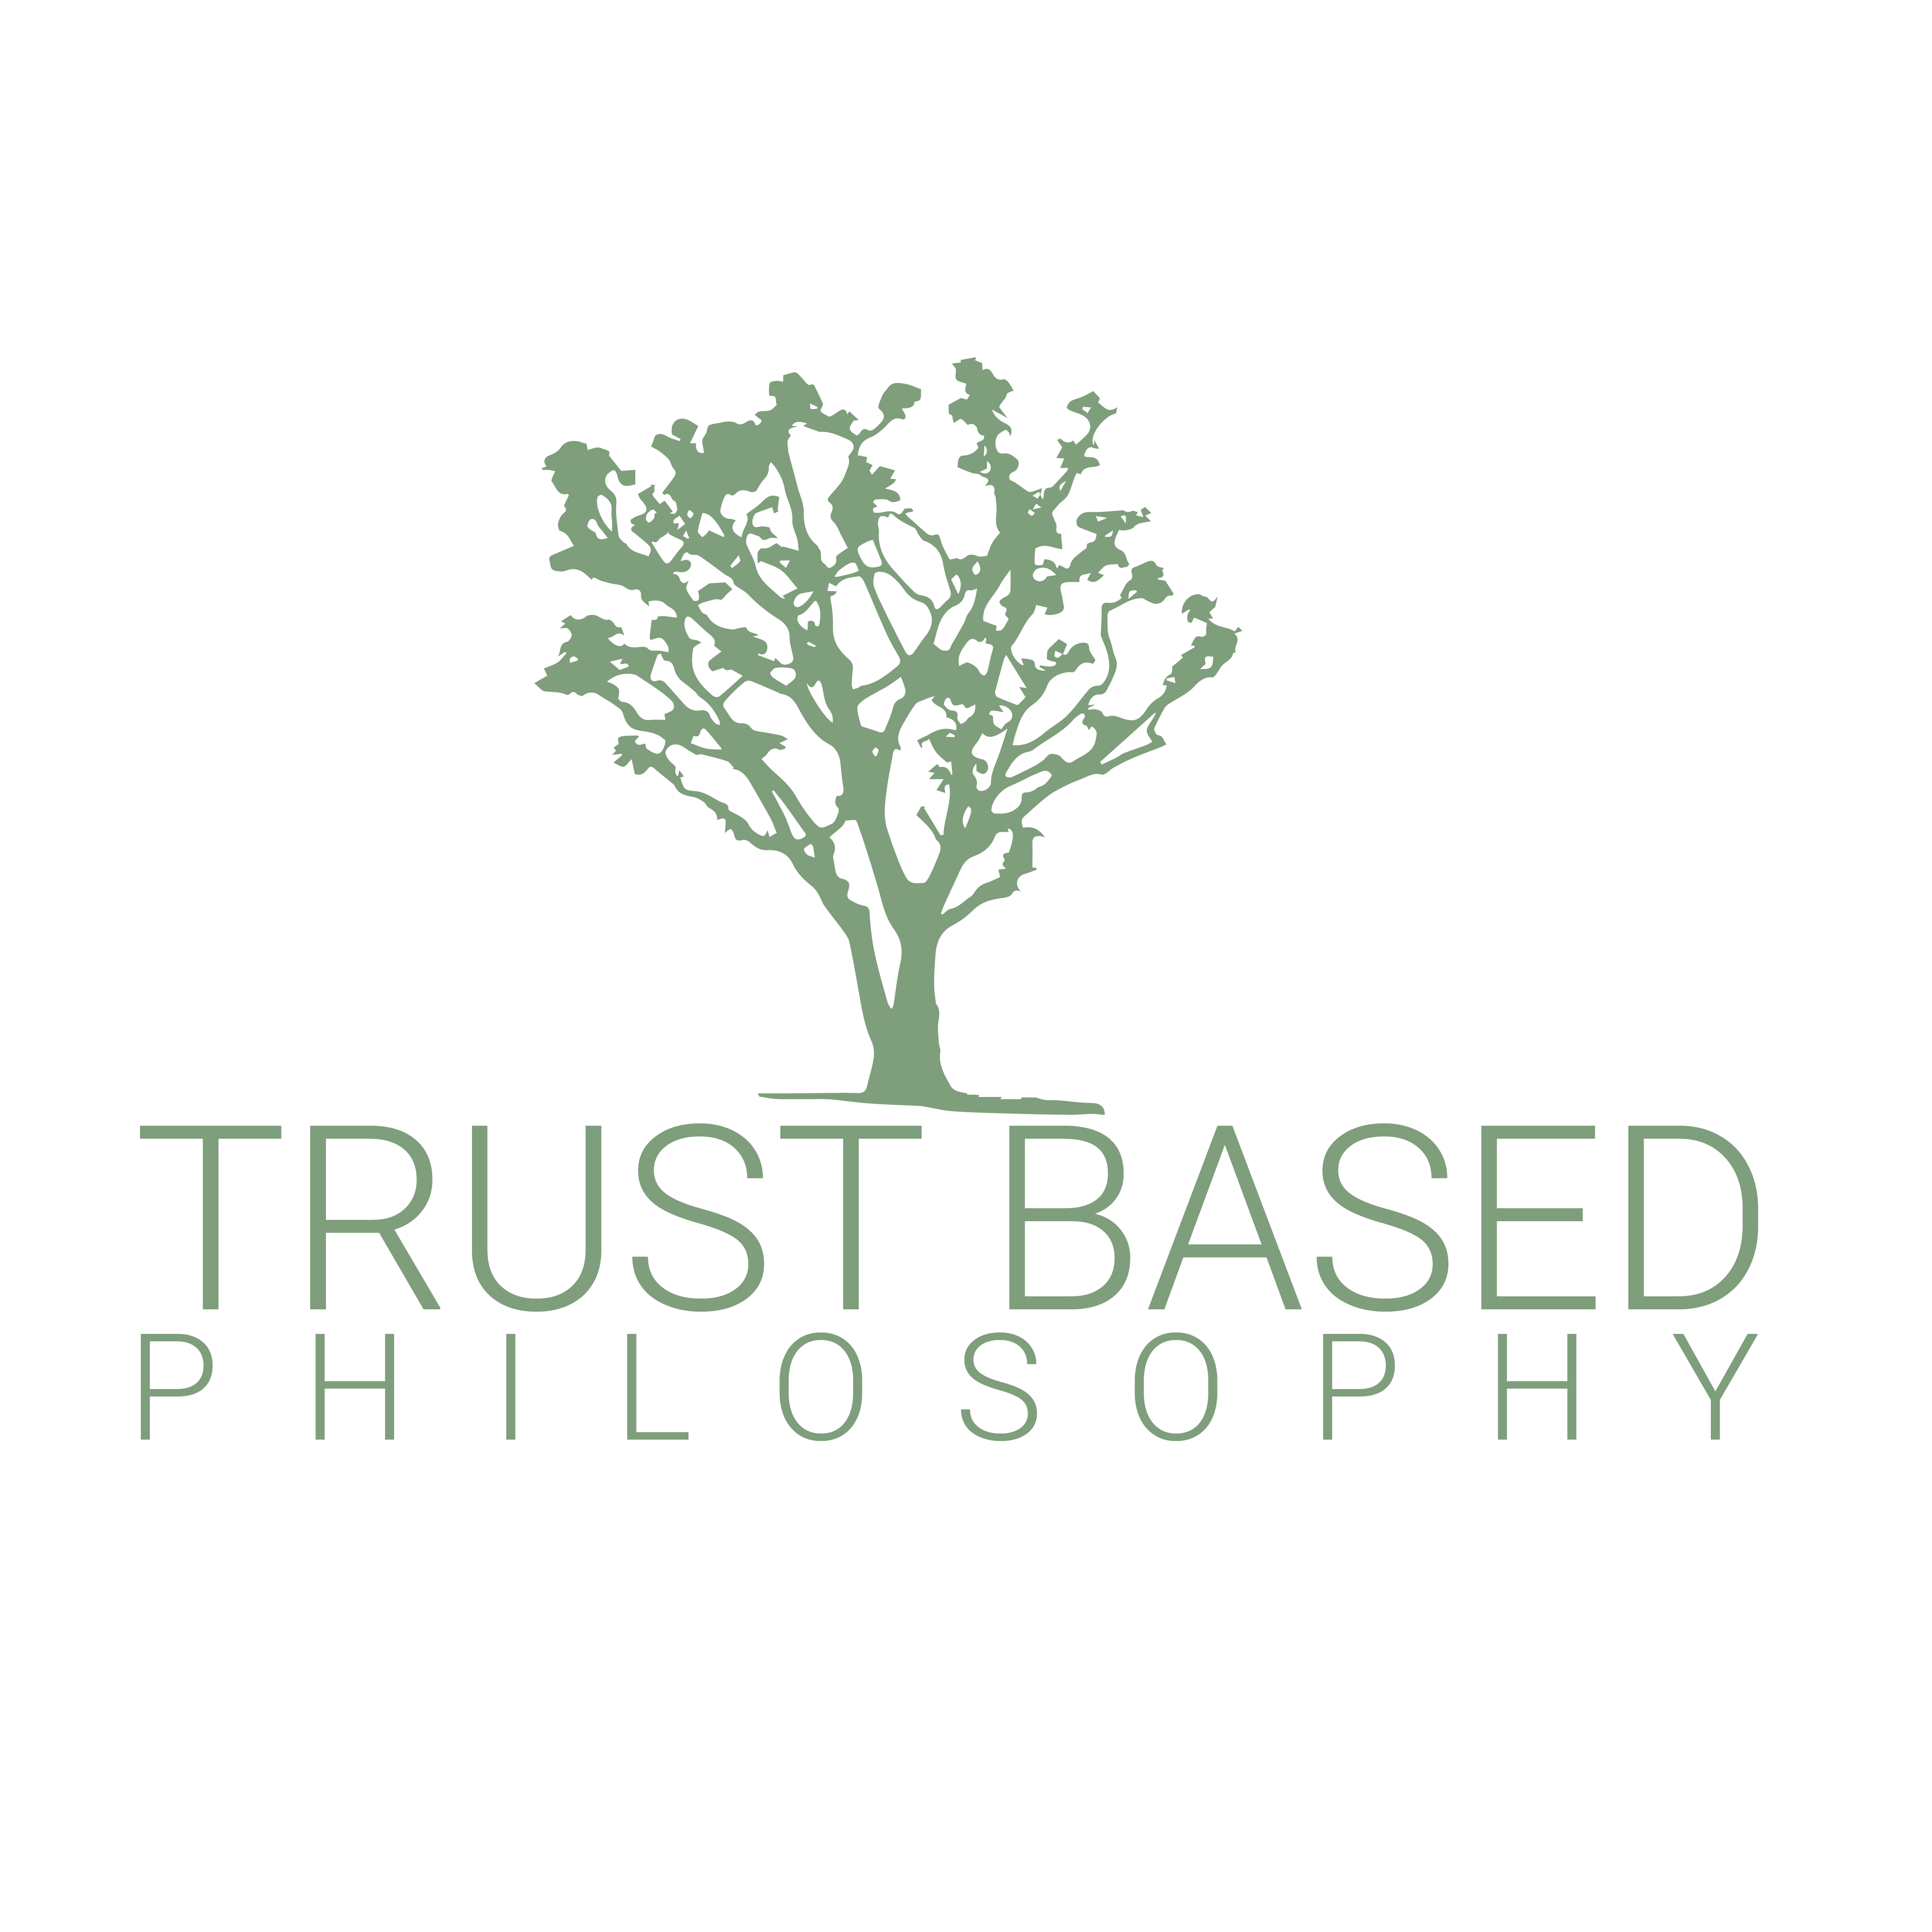 The Trust Based Phiosophy